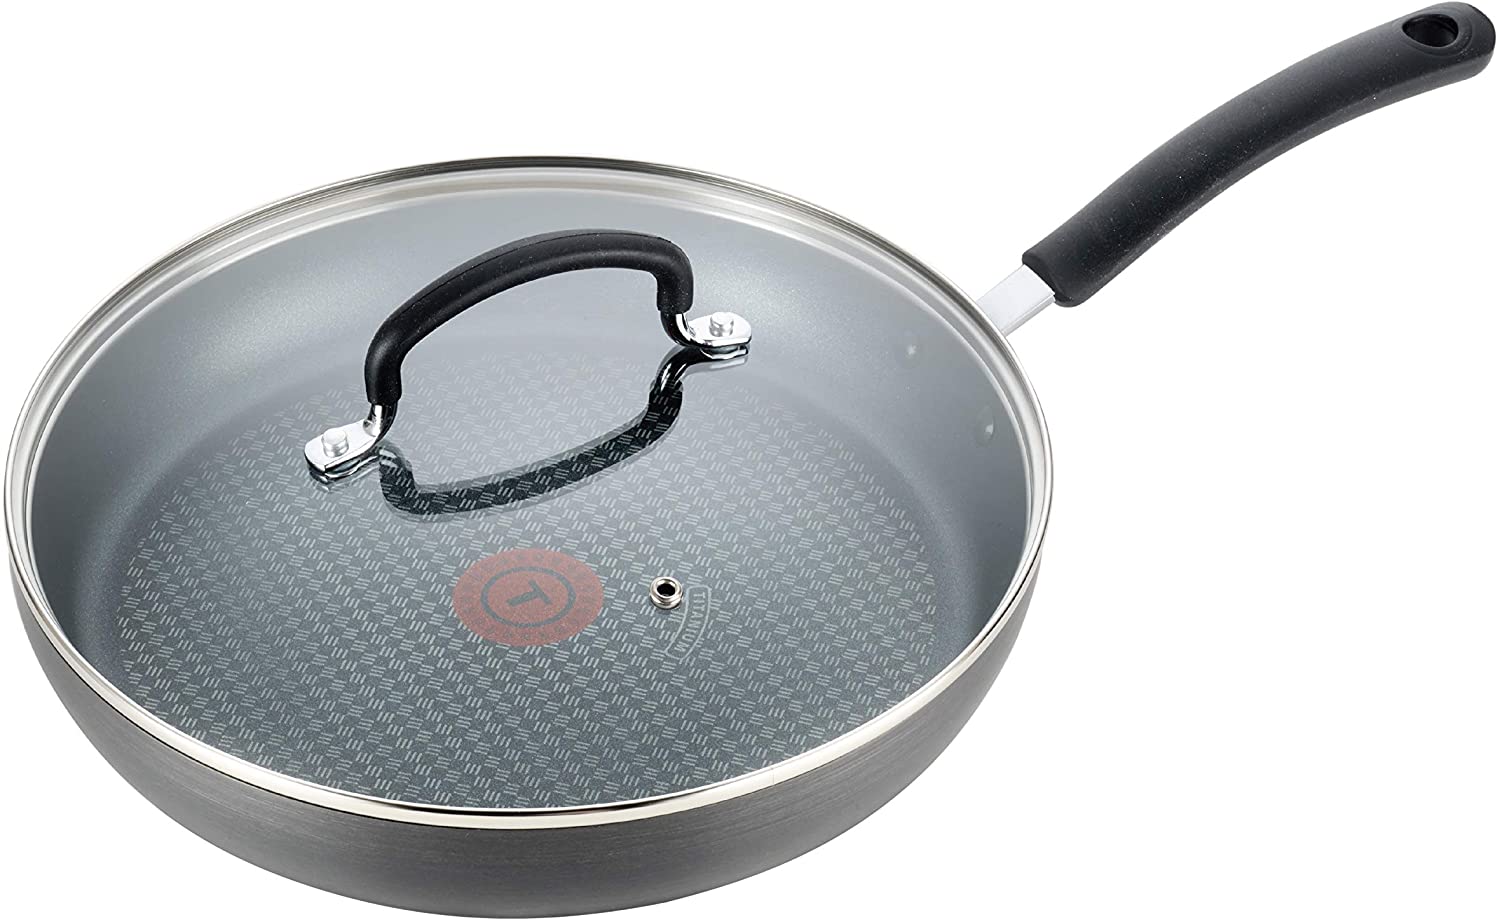 T-Fal Dishwasher Safe Cookware 12 Inch Fry Pan Hard Anodized Titanium 